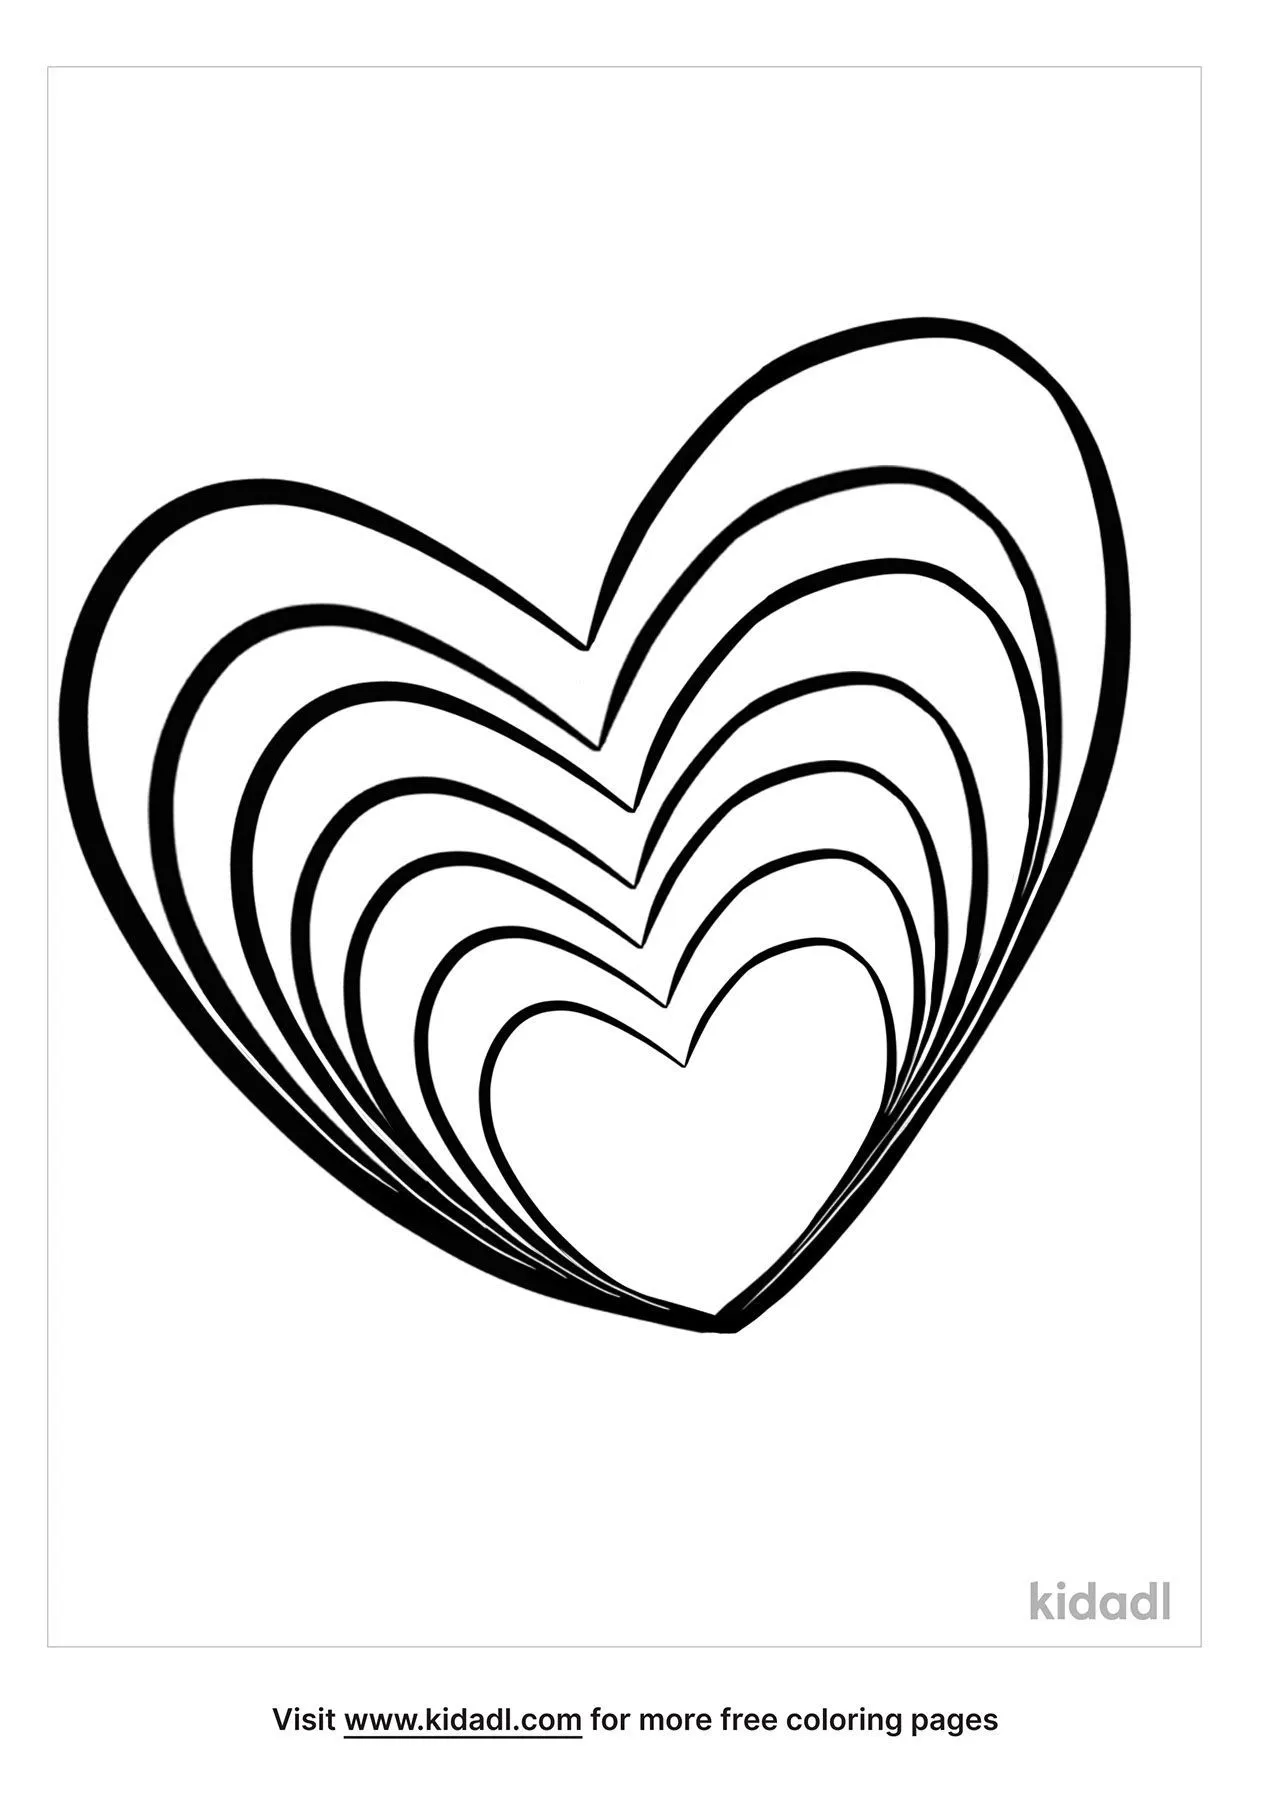 Rainbow Heart Coloring Pages - Hearts Coloring Pages Coloringall : Free